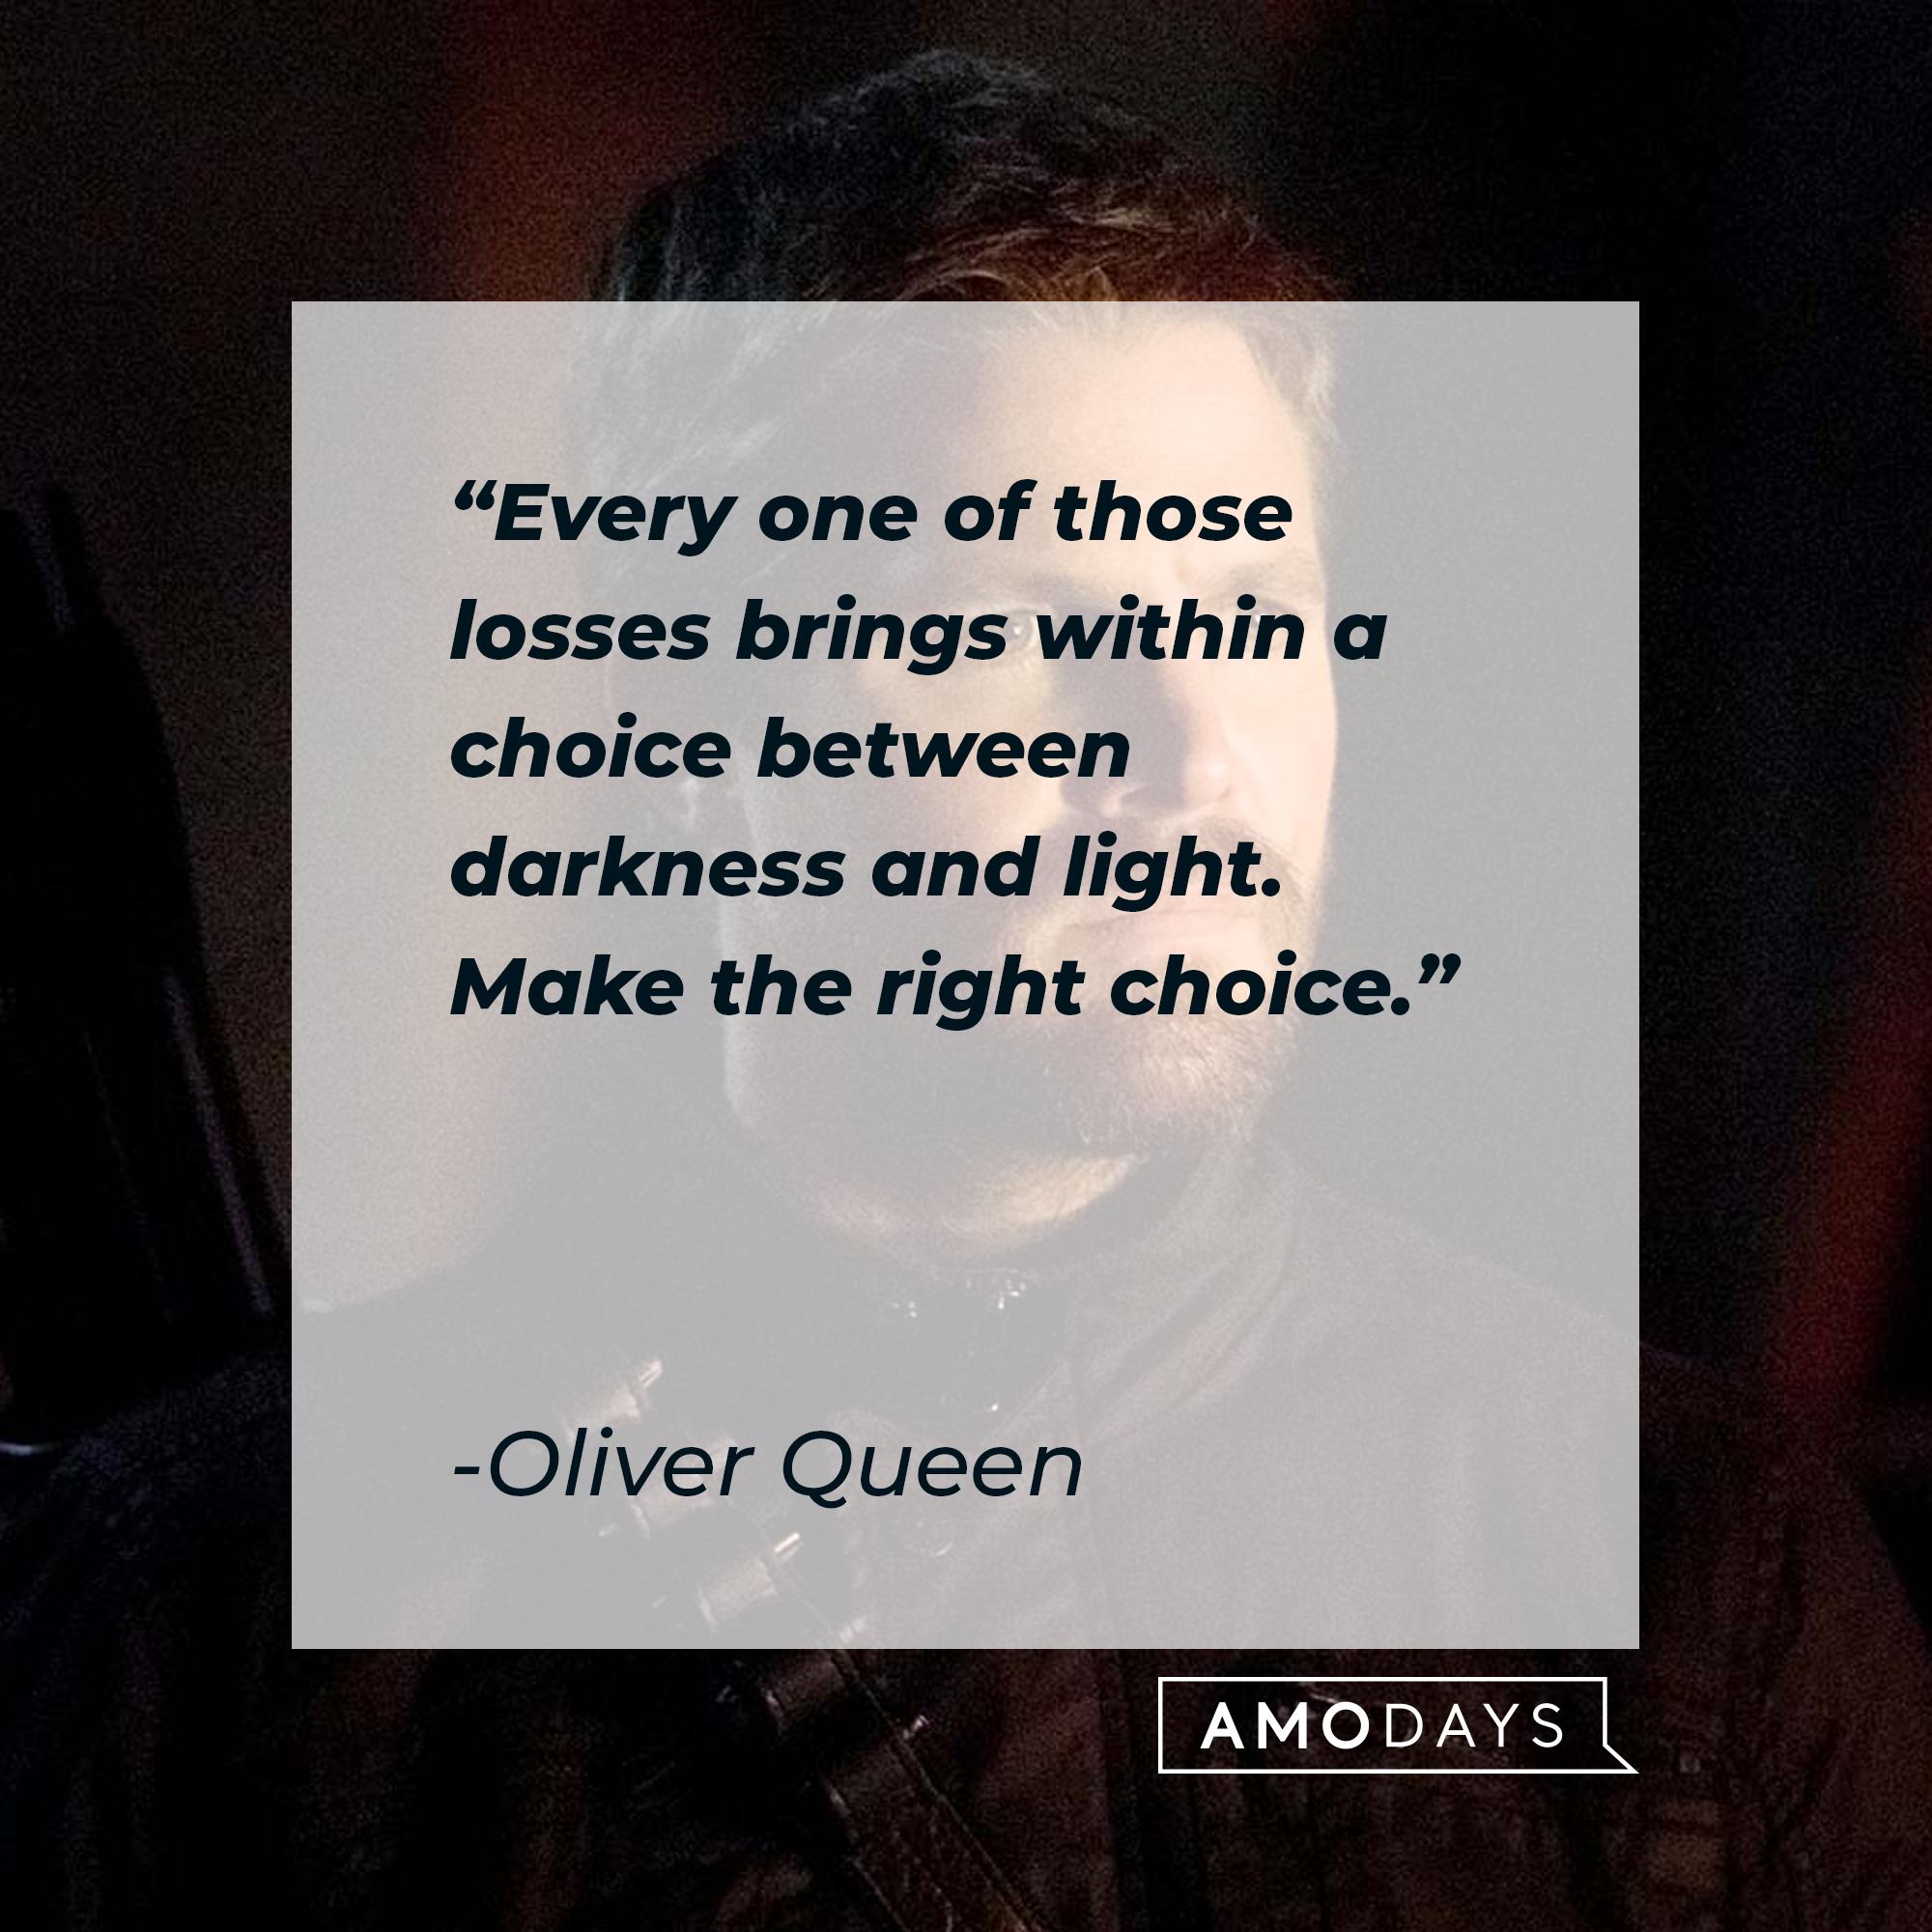 An image of Oliver Queen with his quote: “Every one of those losses brings within a choice between darkness and light. Make the right choice.” |  Source: facebook.com/CWArrow